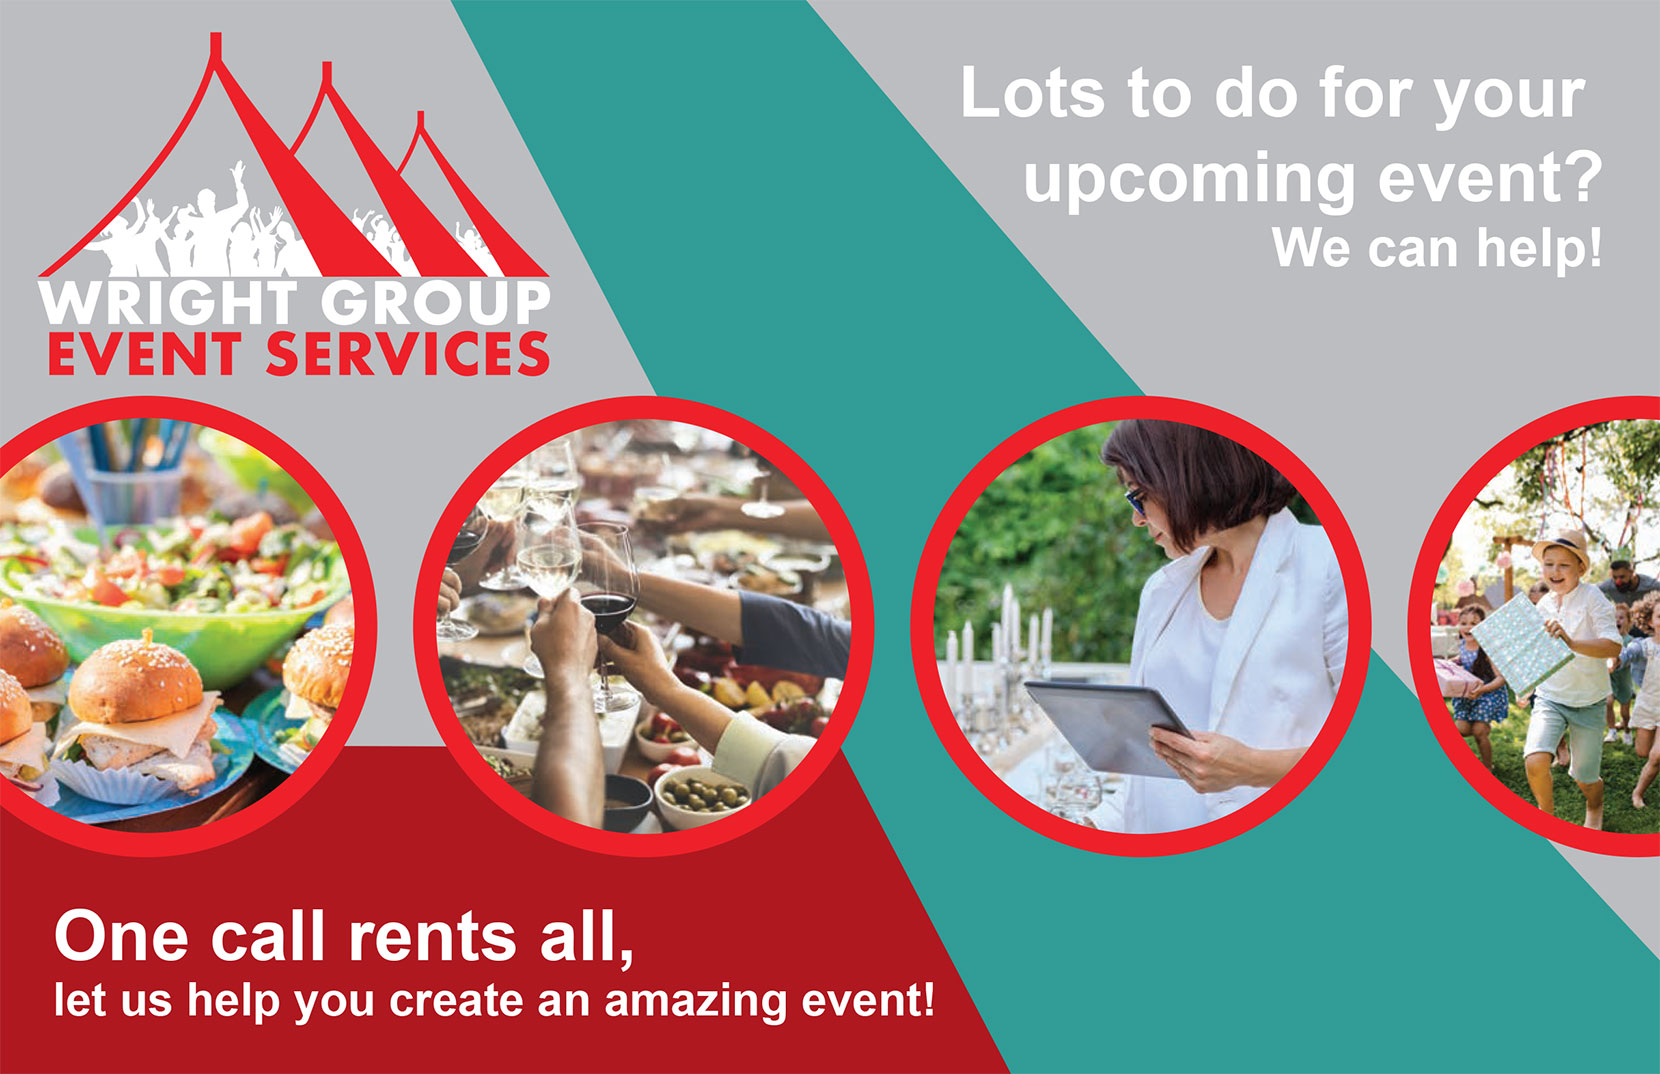 Lots to do for your upcoming event? We can help! Once call rents all, let us help you create an amazing event!